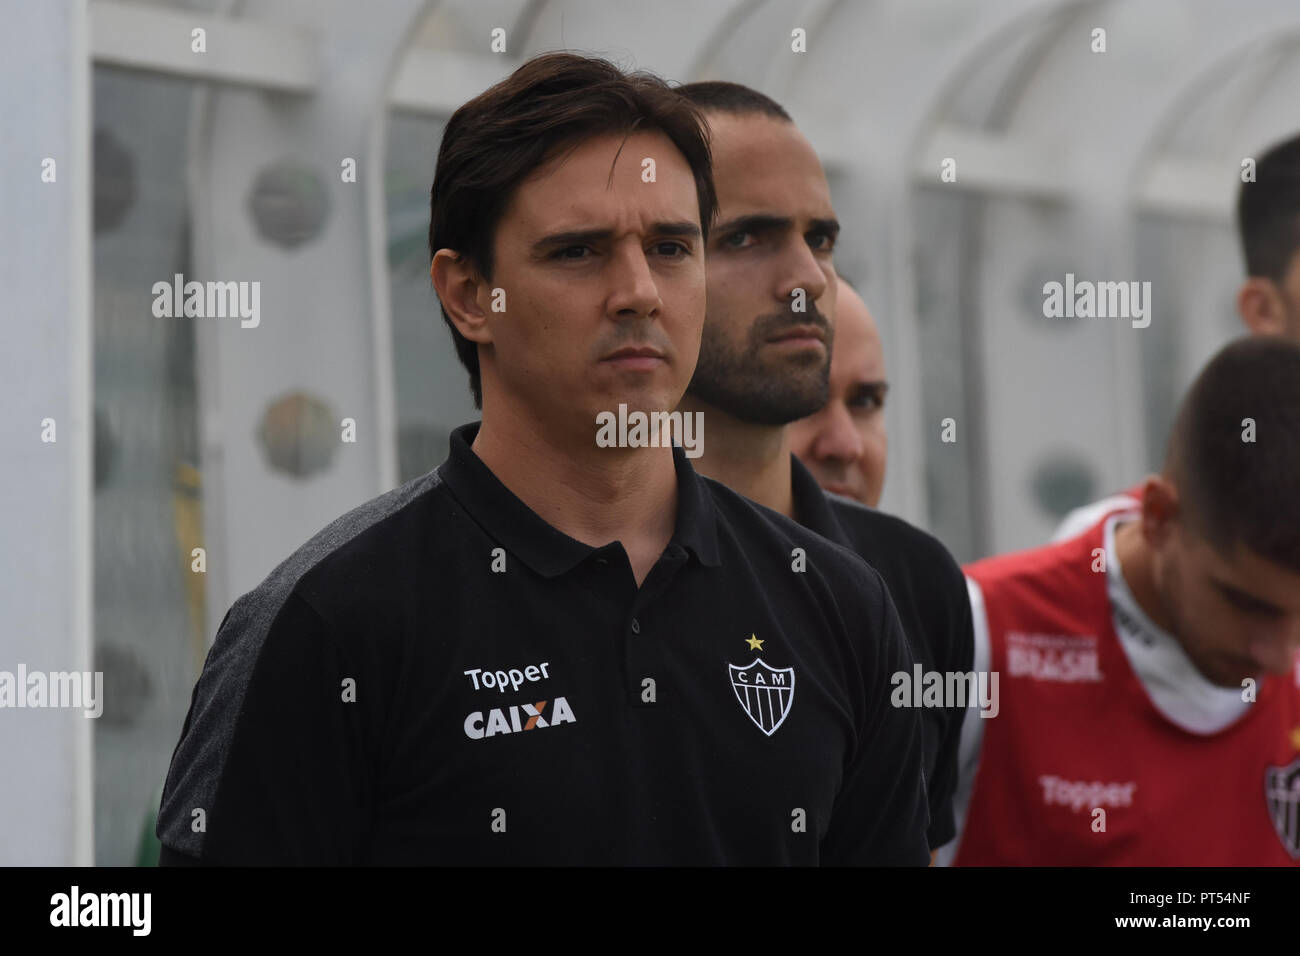 SC - Chapeco - 06/10/2018 - BRASILEIR OA 2018, athletic coach of MG Thiago Largui during a match against Chapecoense at Arena Cond stadium for the Brazilian championship A 2018. Photo: Renato Padilha / AGIF Stock Photo